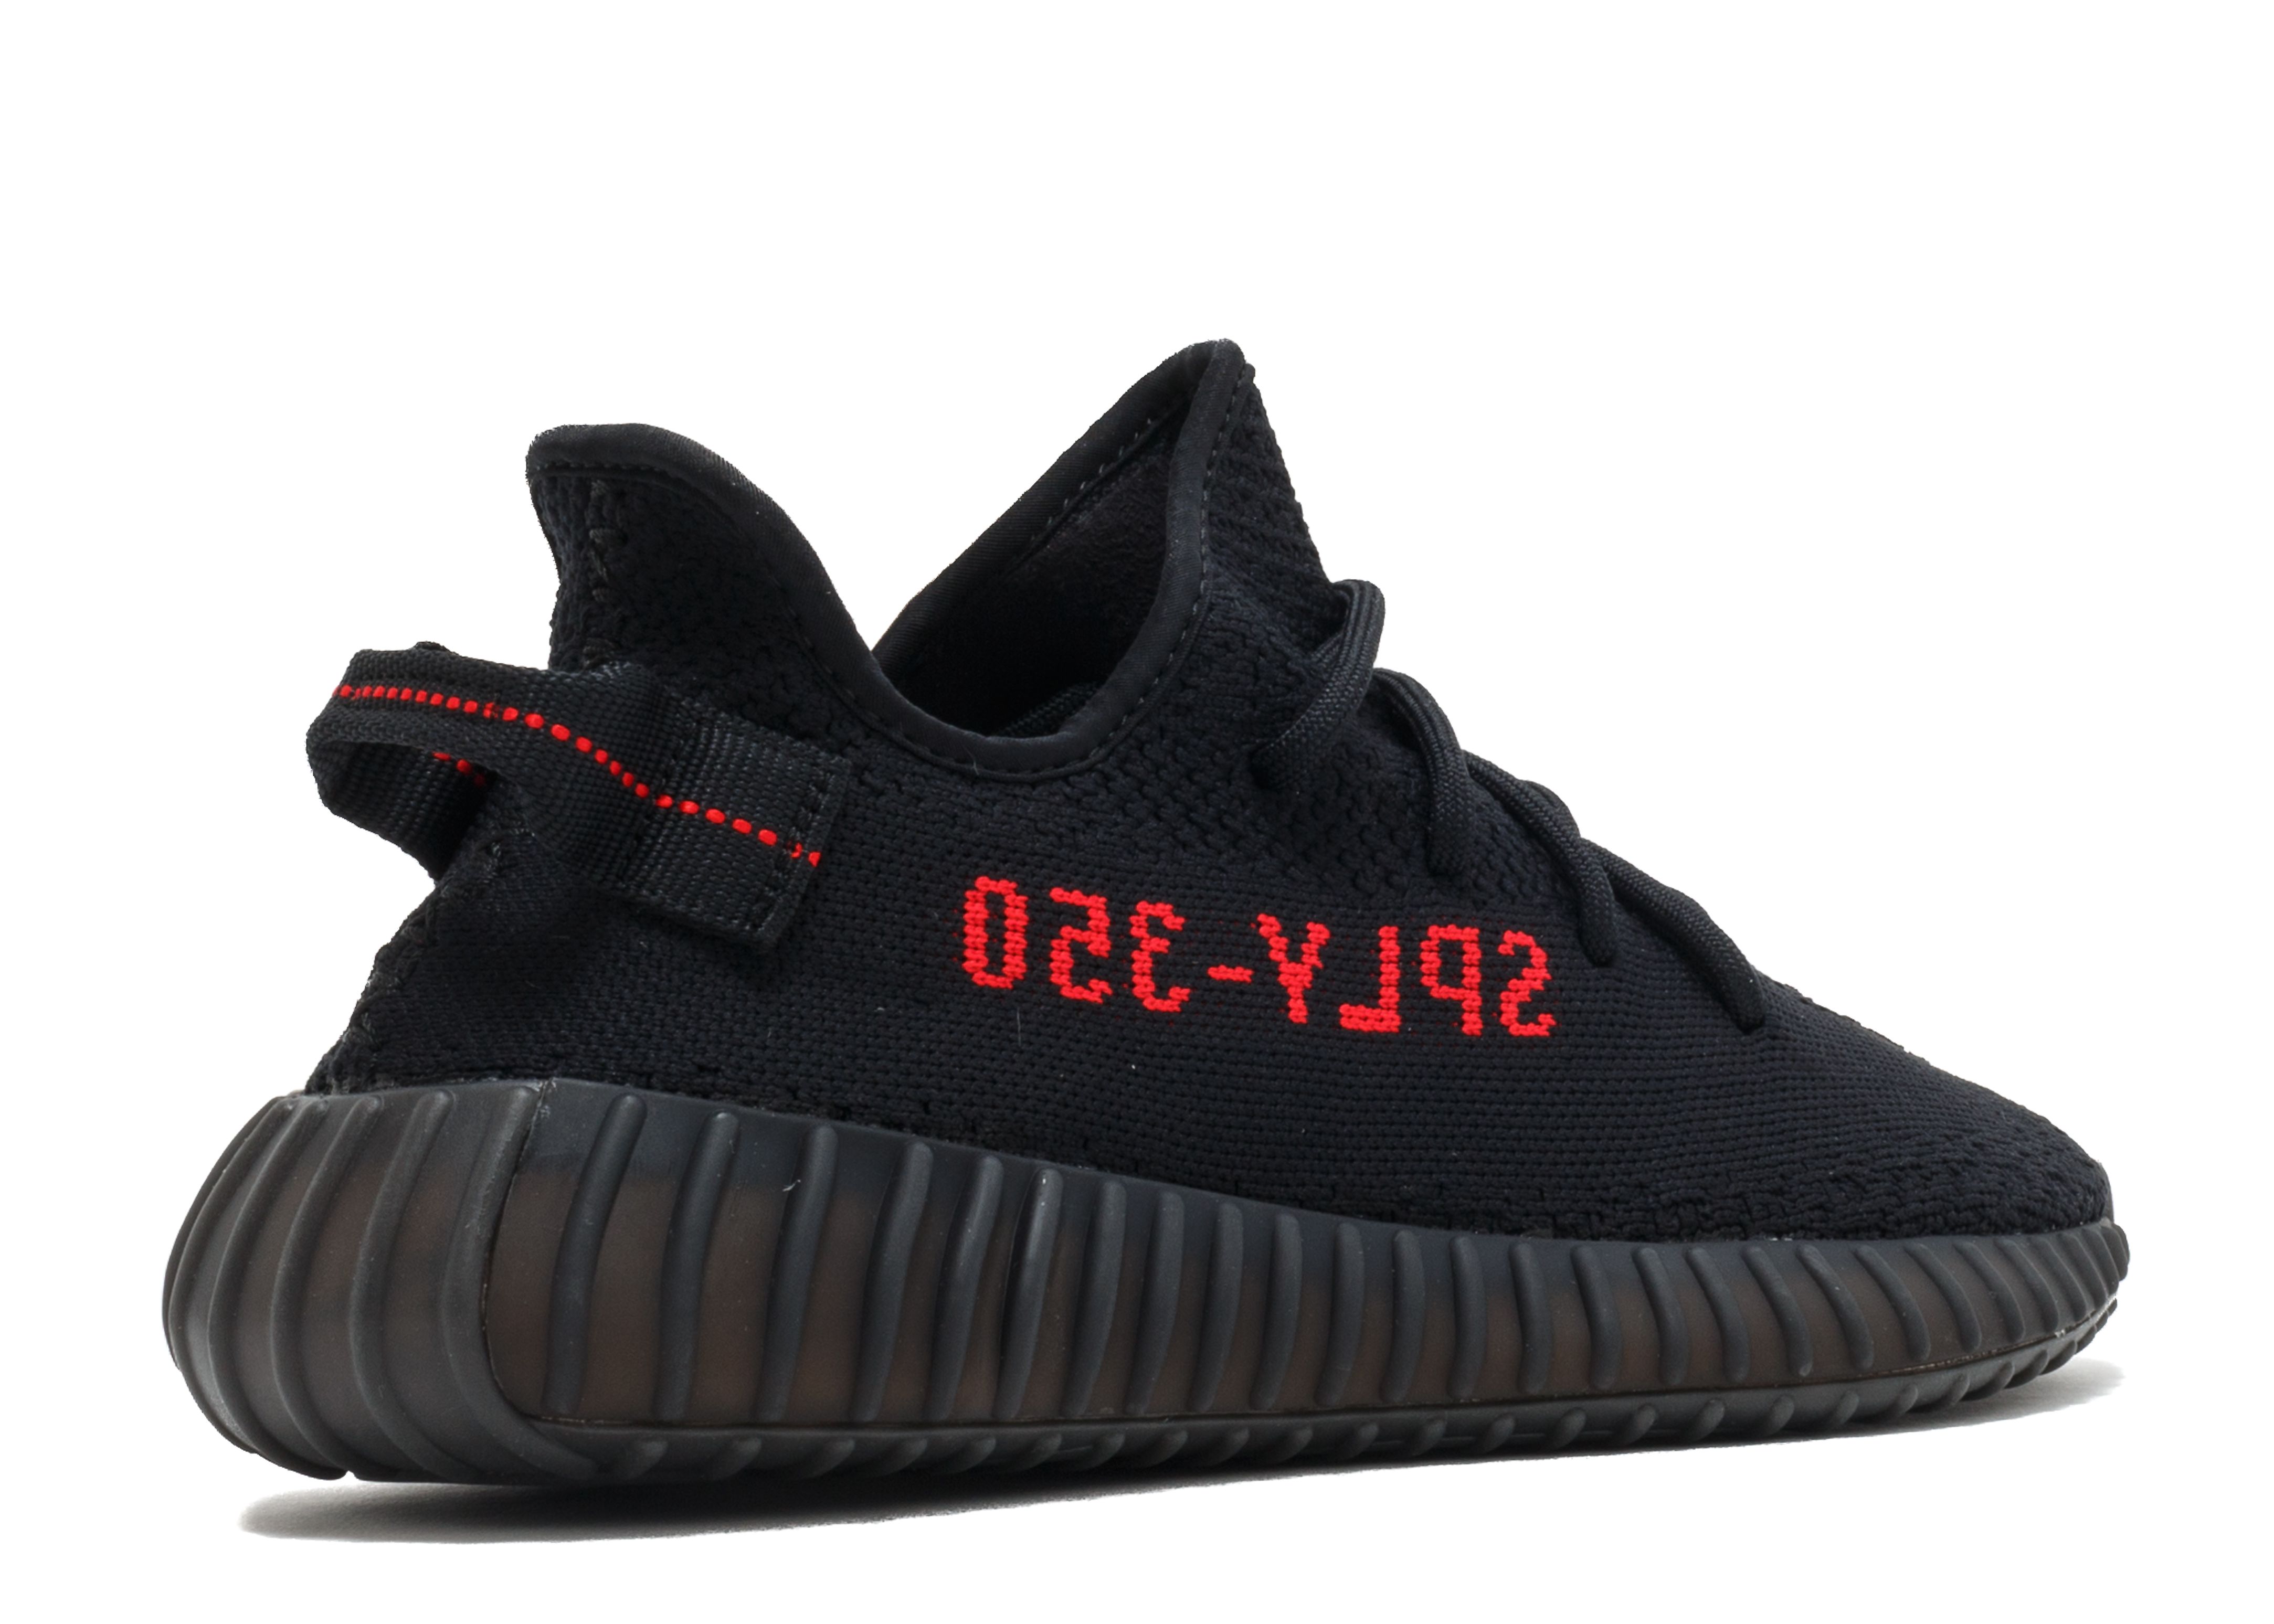 Yeezy Boost 350 V2 'Bred' - Adidas - CP9652 - core black/core 